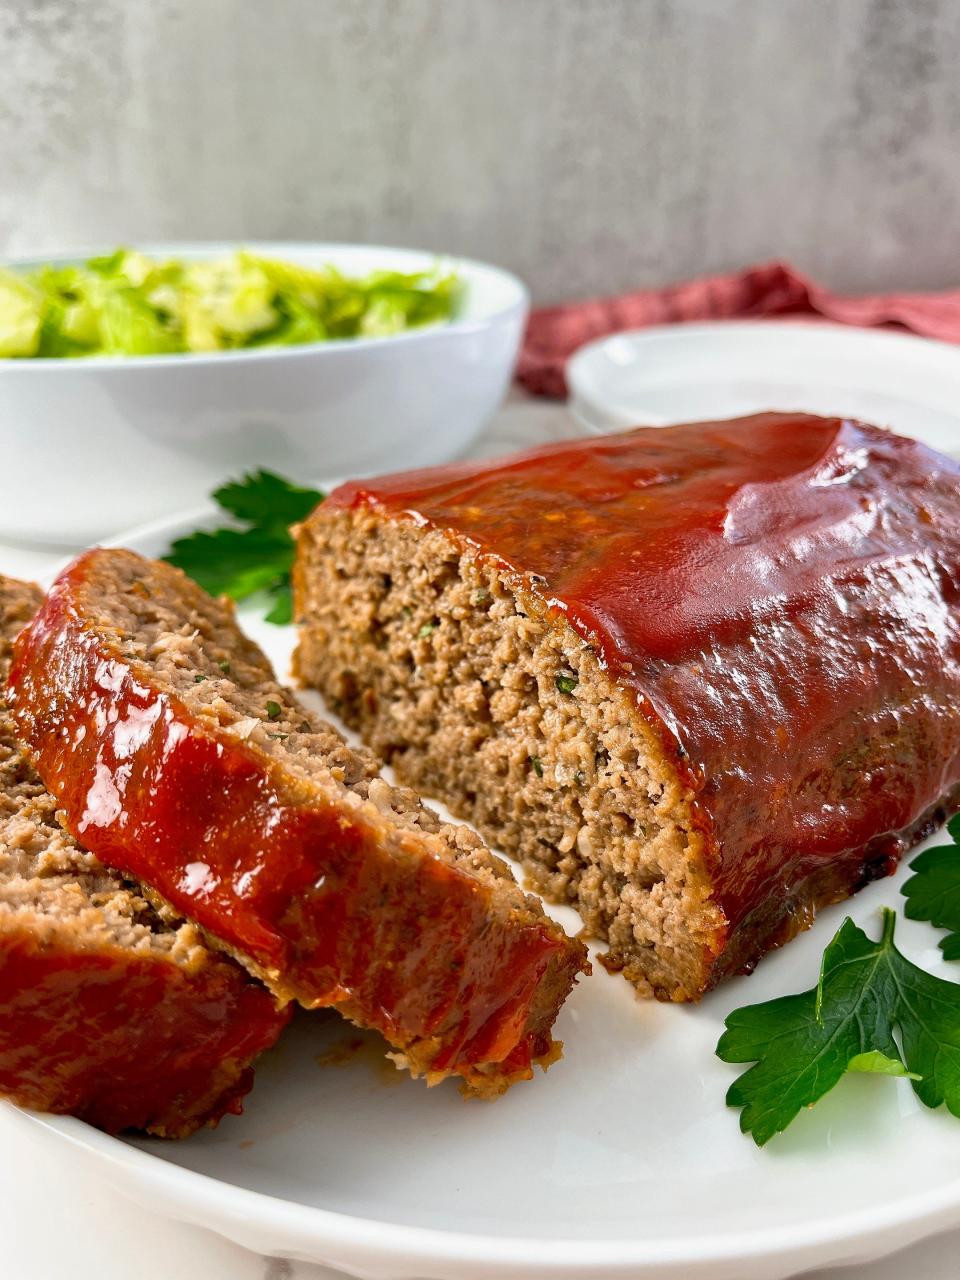 Serve meatloaf with a simple salad for a fast and easy weeknight meal.